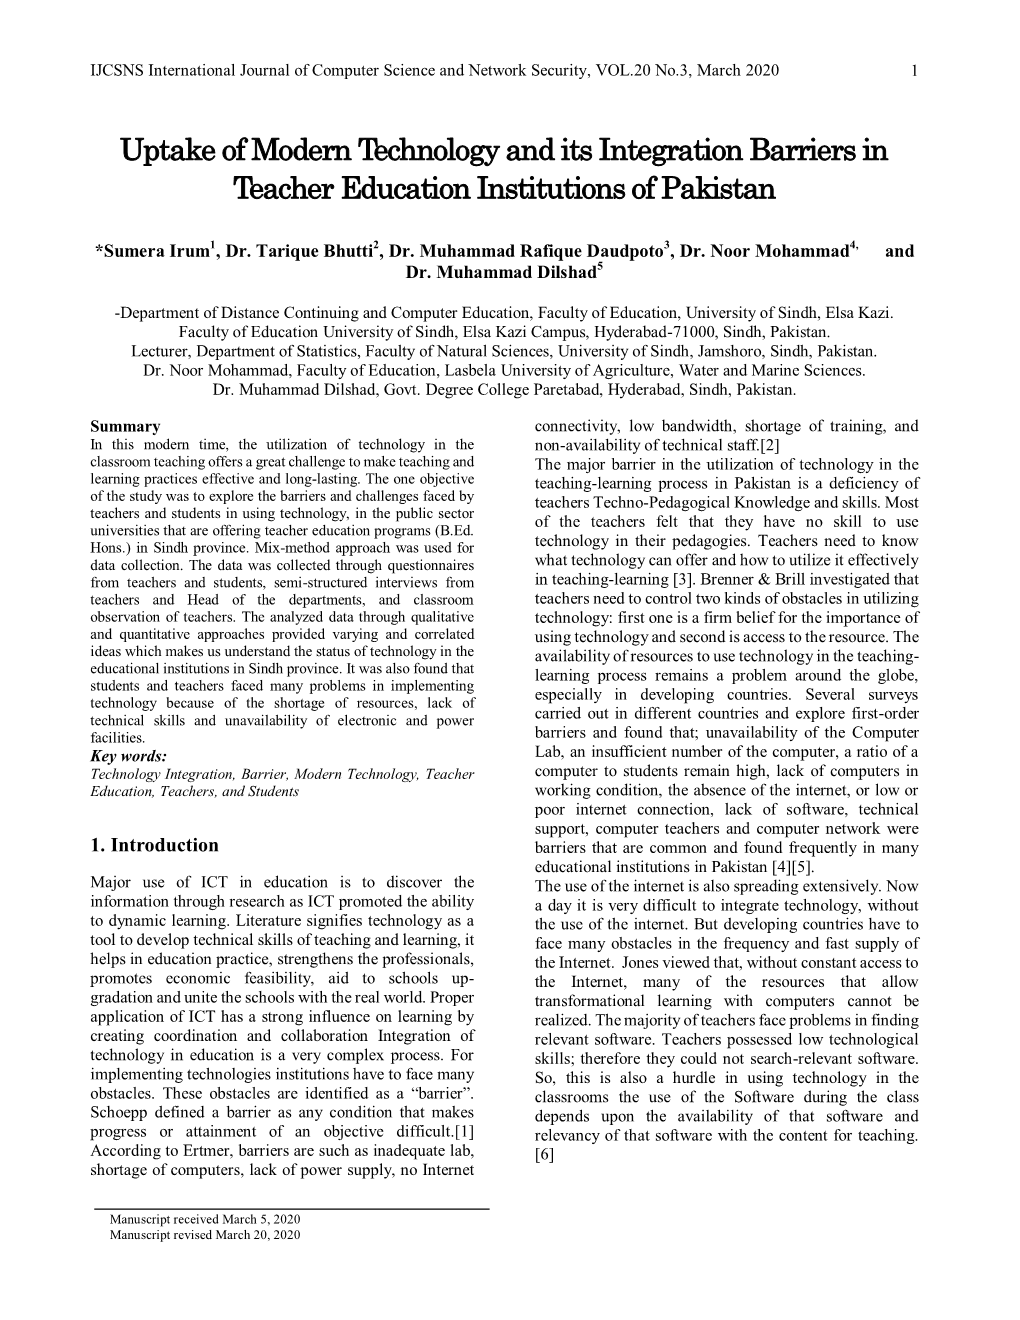 Uptake of Modern Technology and Its Integration Barriers in Teacher Education Institutions of Pakistan